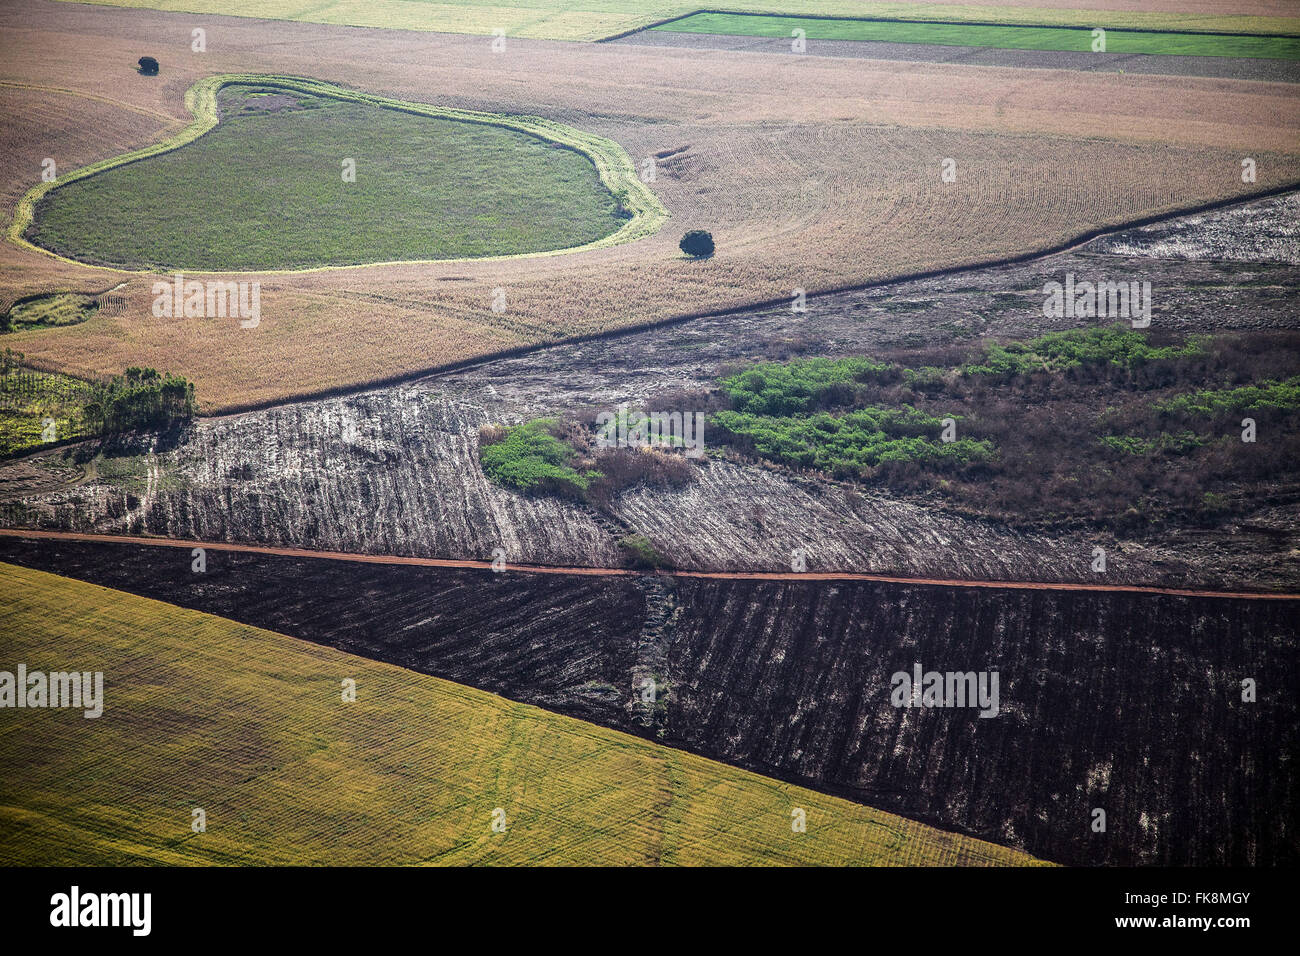 Aerial view of farm with planting corn, wheat and sugar cane Stock Photo